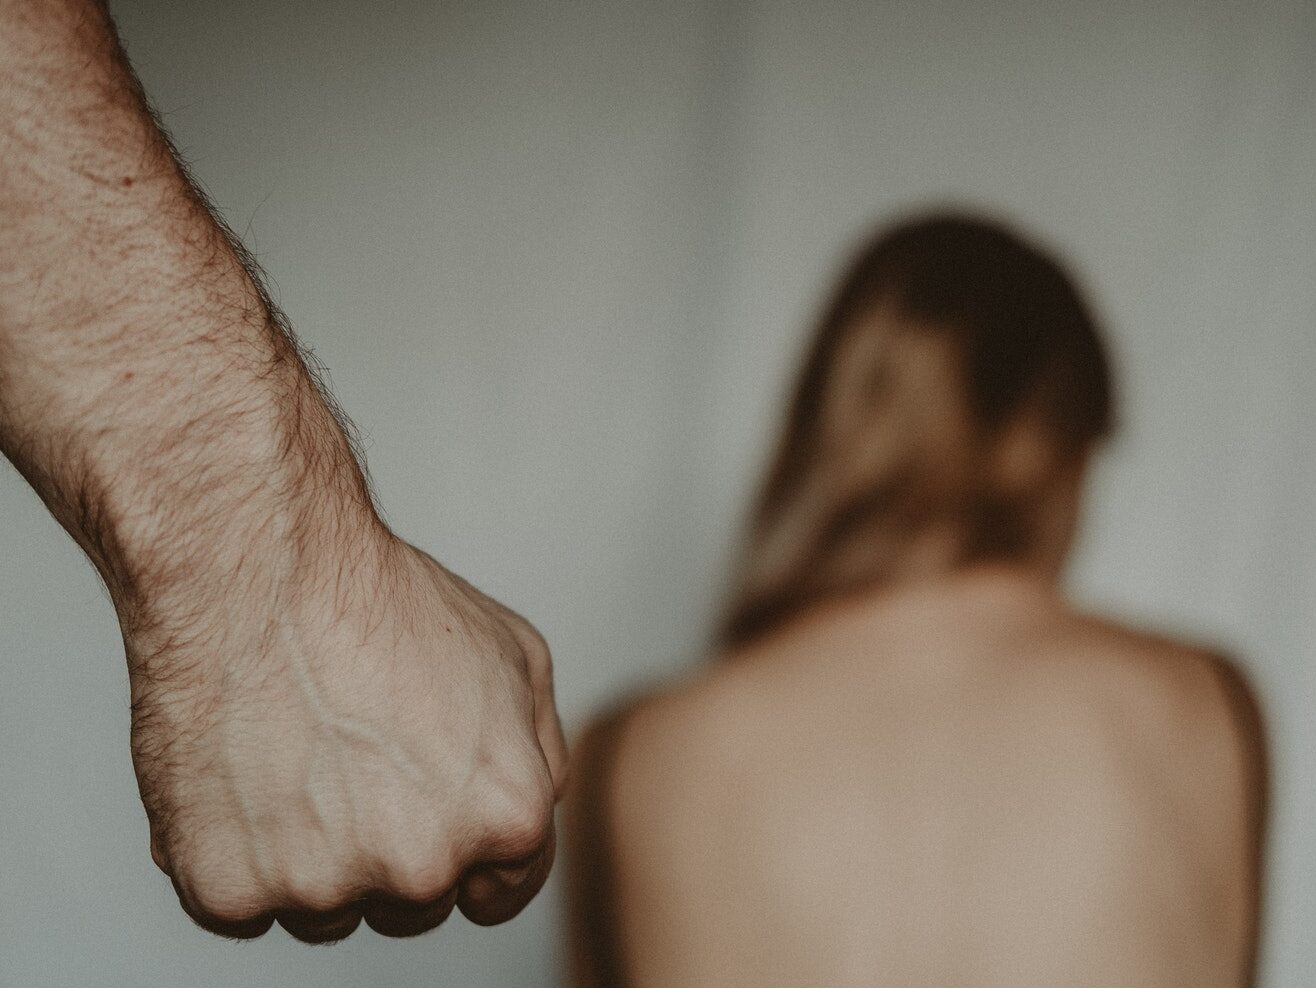 Aggressive abusive anonymous man clenching fist while insulting unrecognizable vulnerable female sitting on blurred background in light room during violence